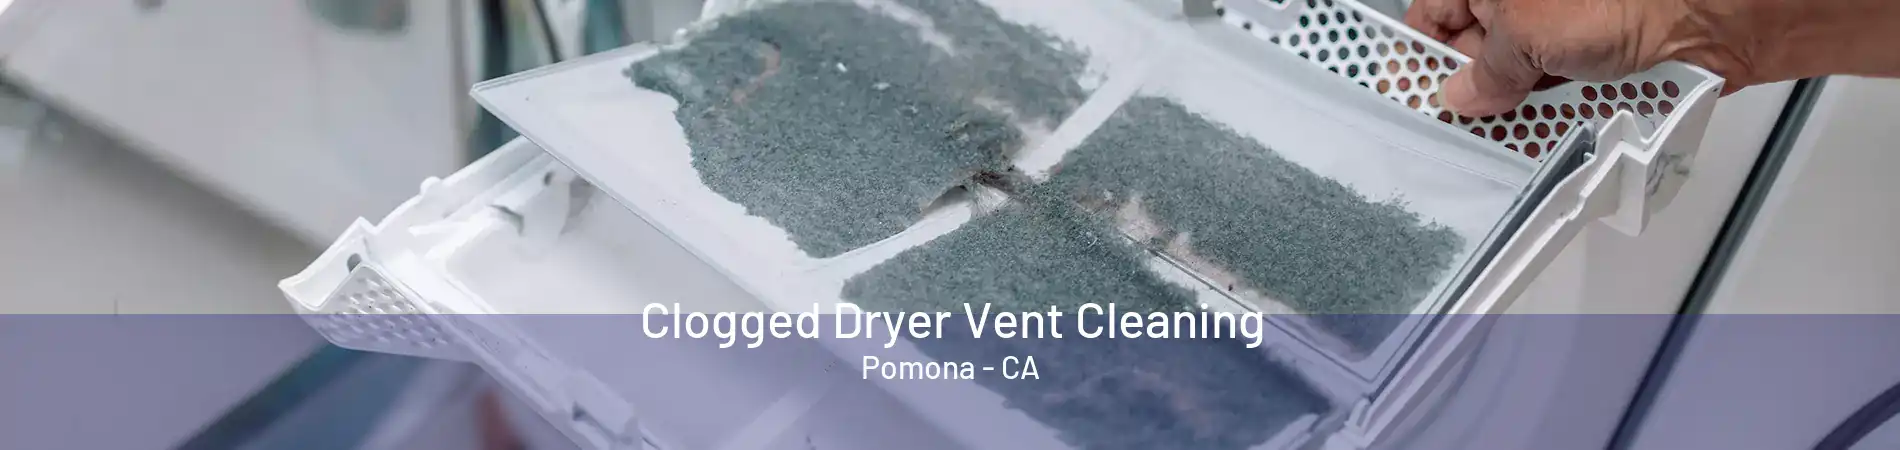 Clogged Dryer Vent Cleaning Pomona - CA